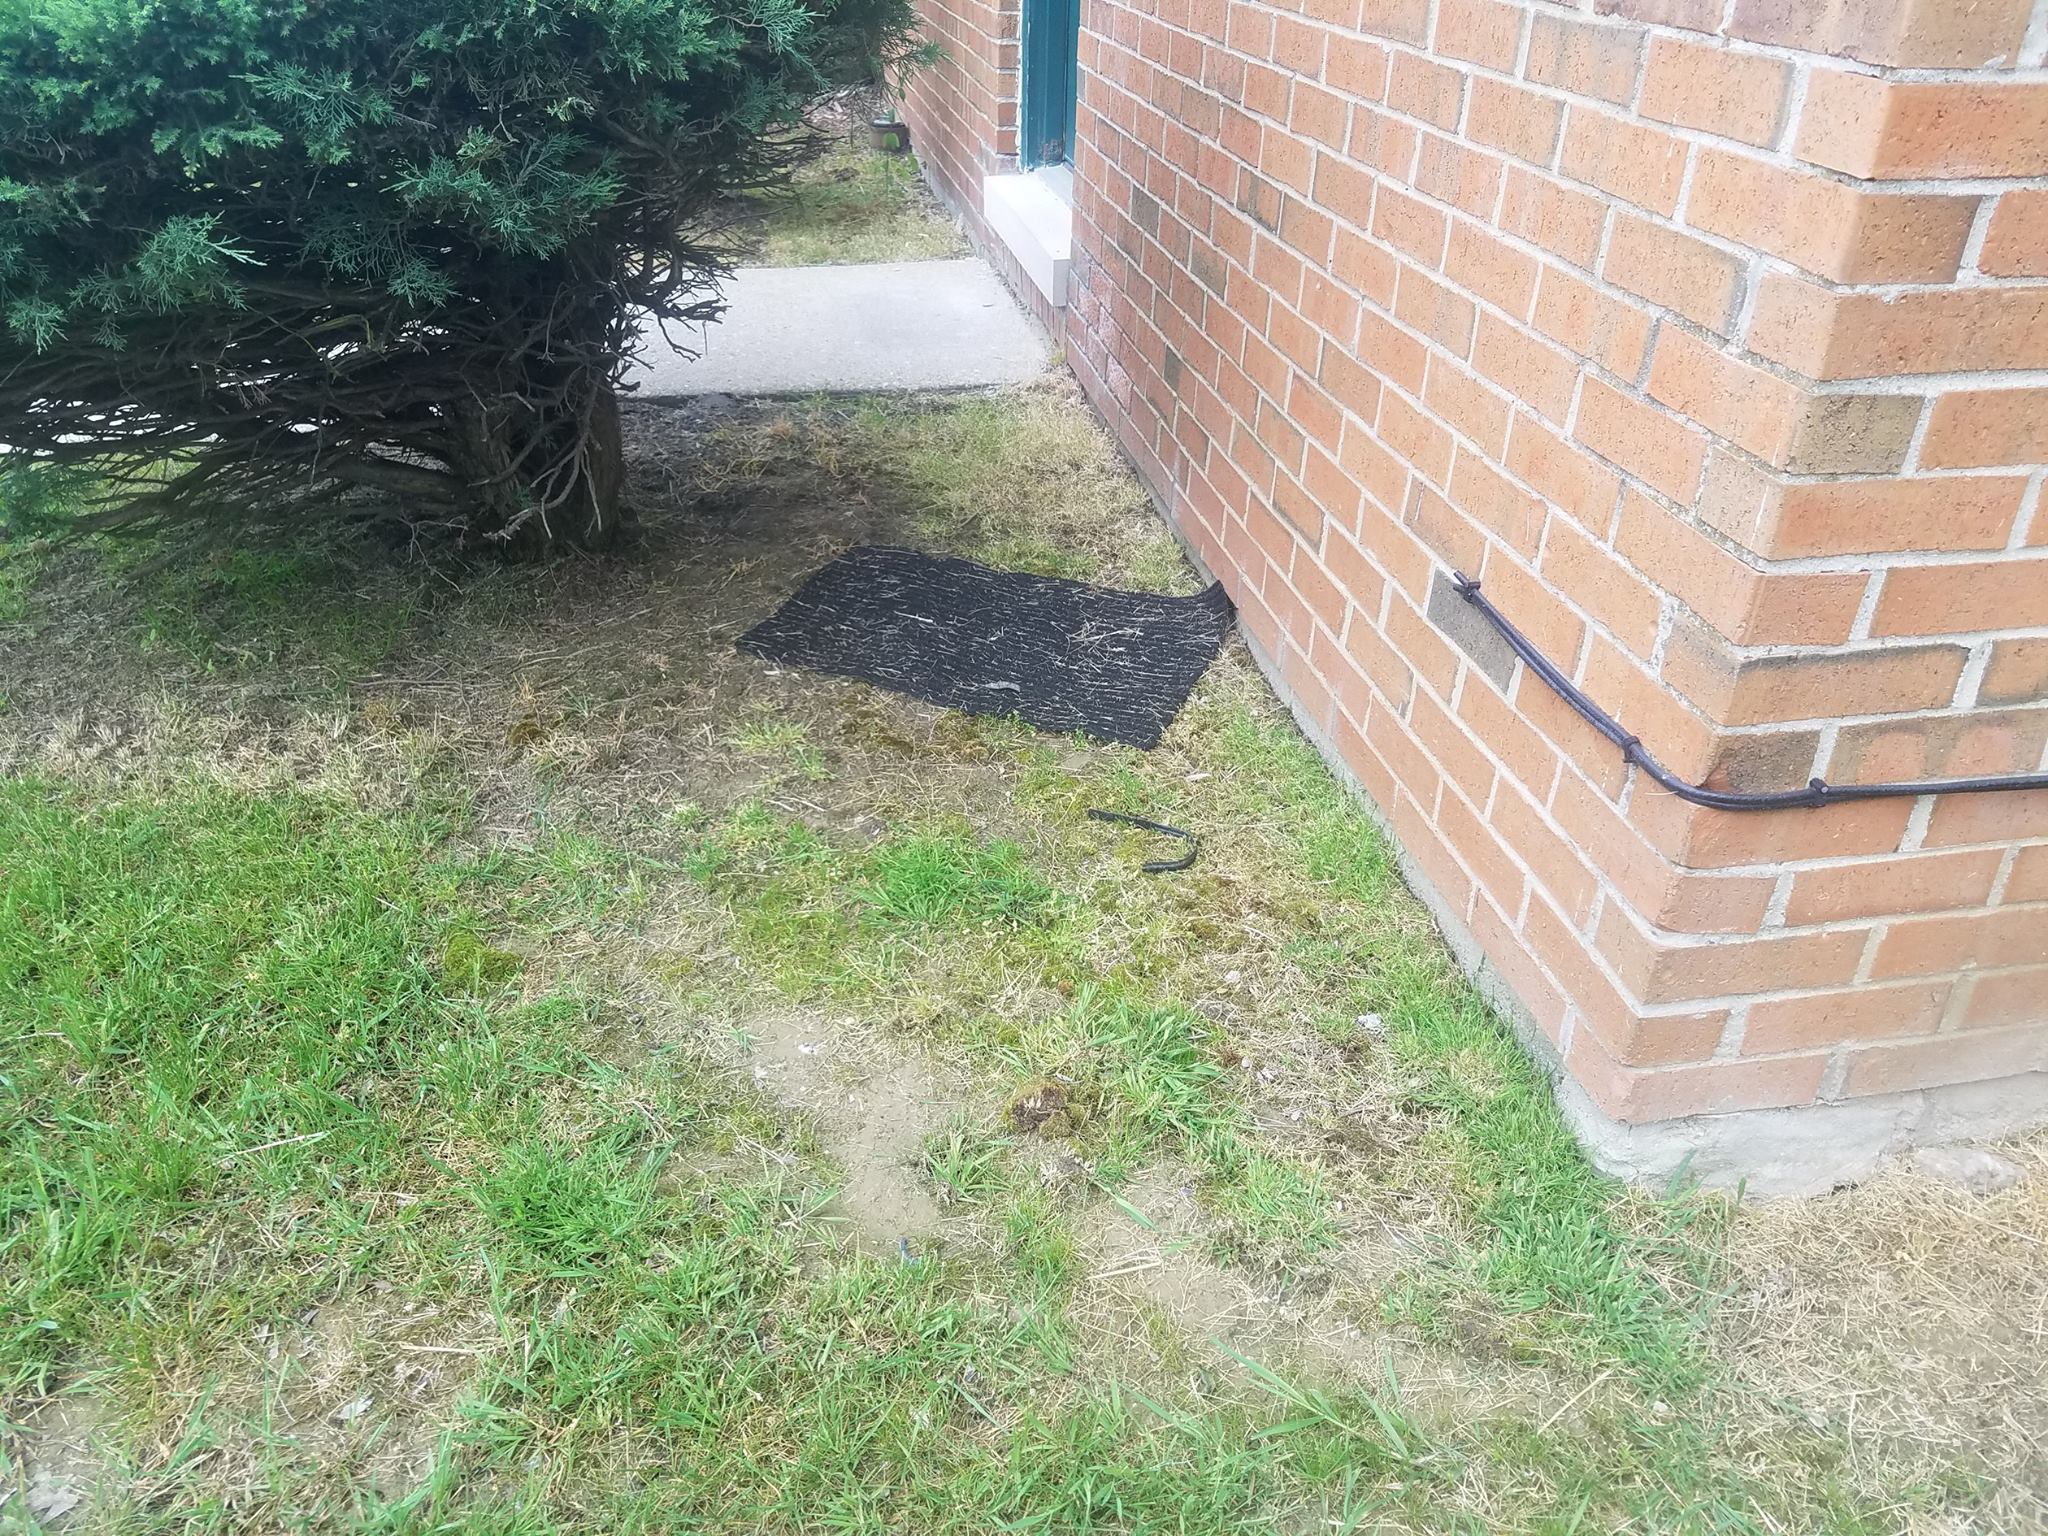 the rug they blew off my porch